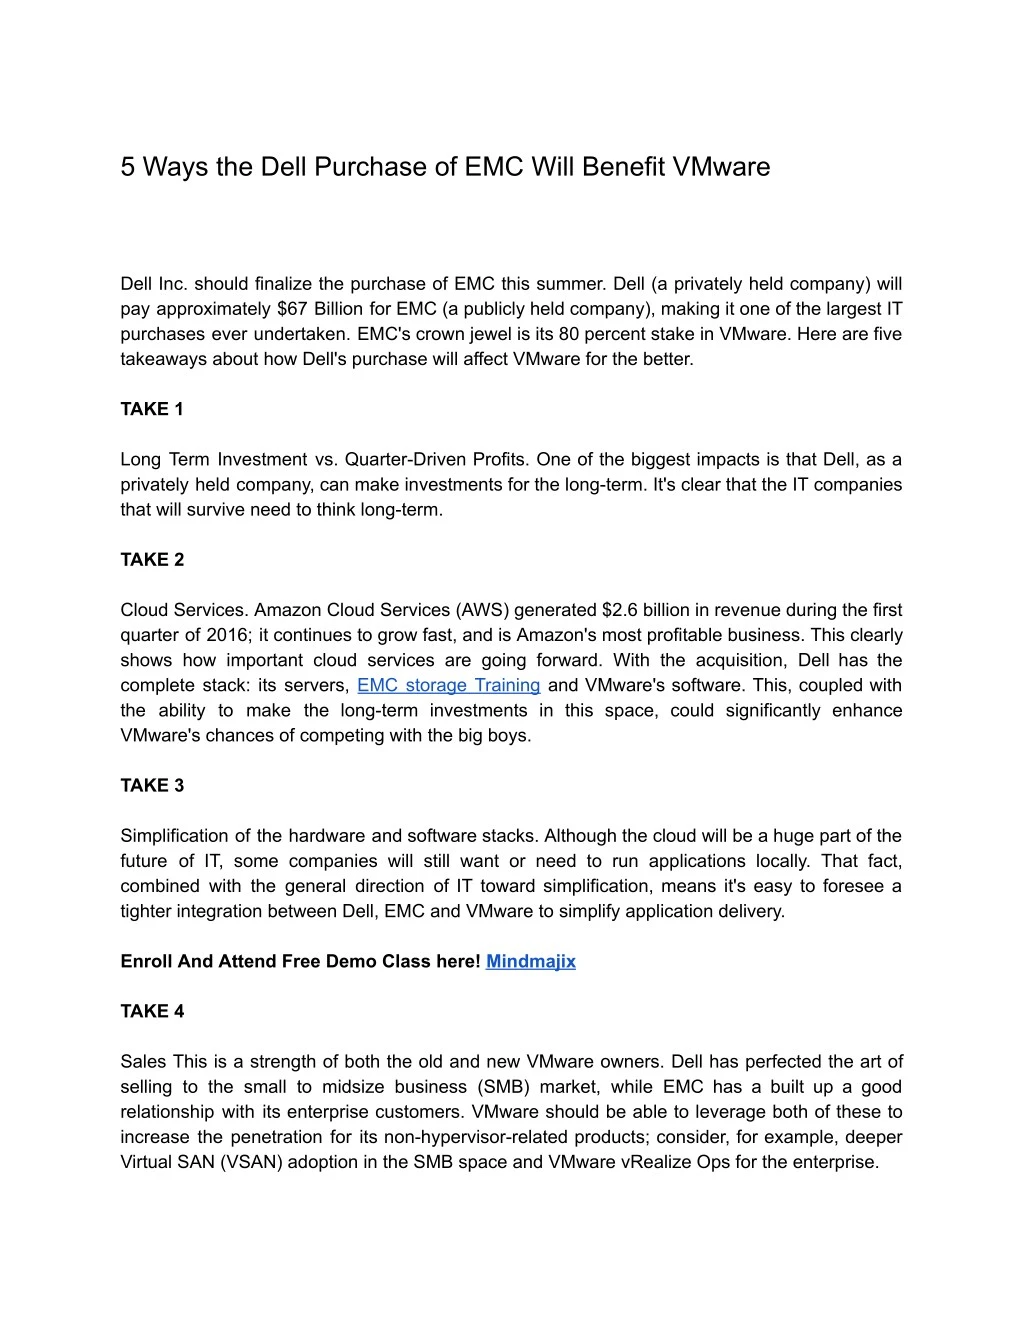 5 ways the dell purchase of emc will benefit